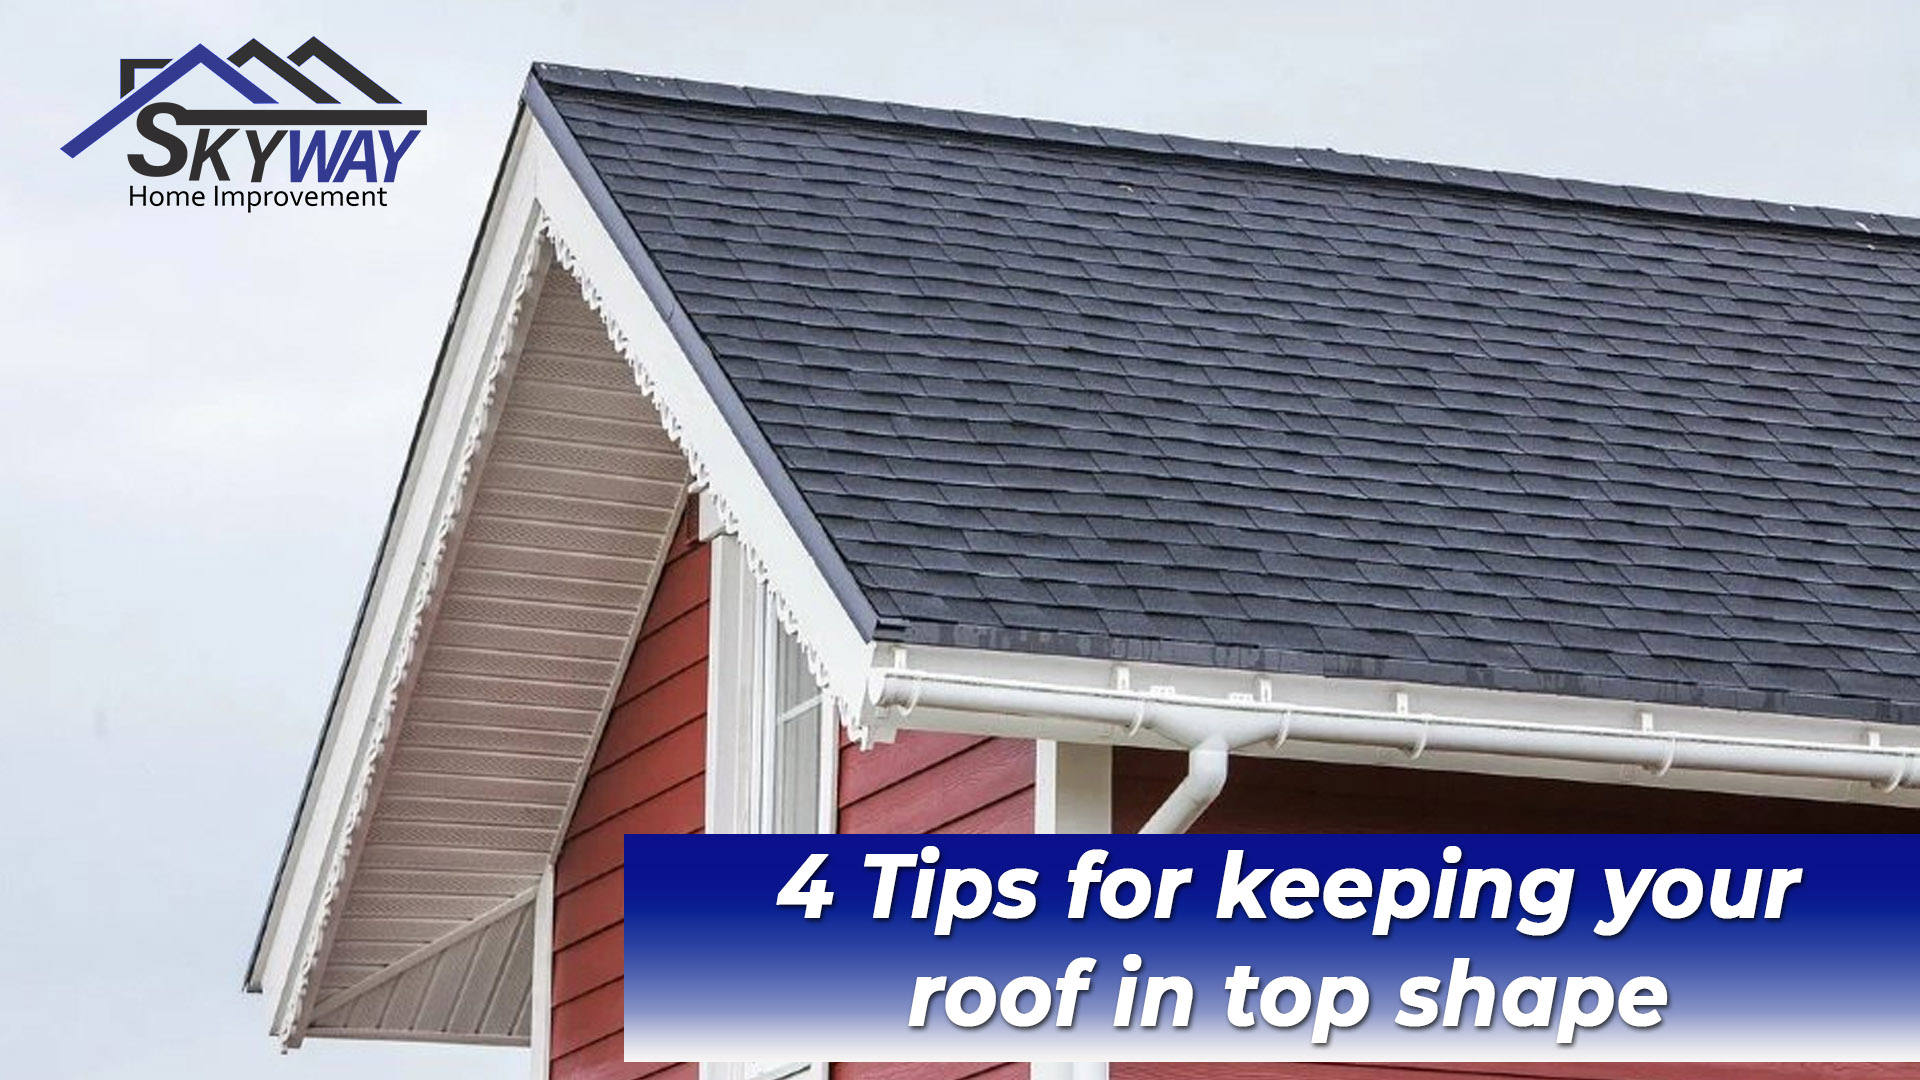 4 Tips for keeping your roof in top shape